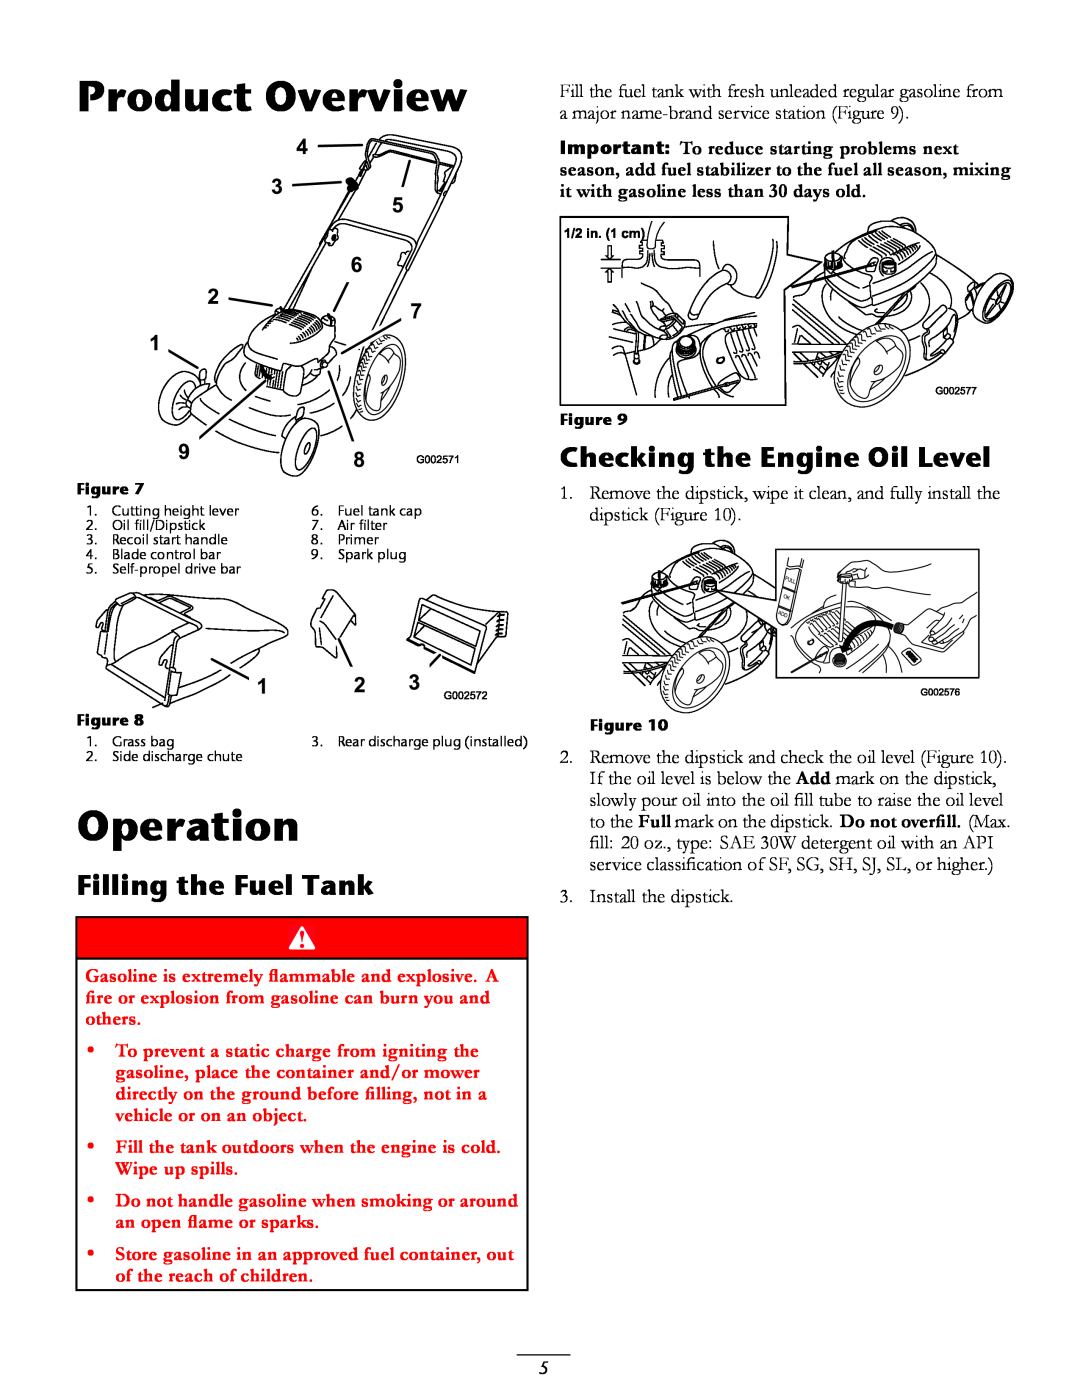 Toro 20016 owner manual Product Overview, Operation, Checking the Engine Oil Level, Filling the Fuel Tank 